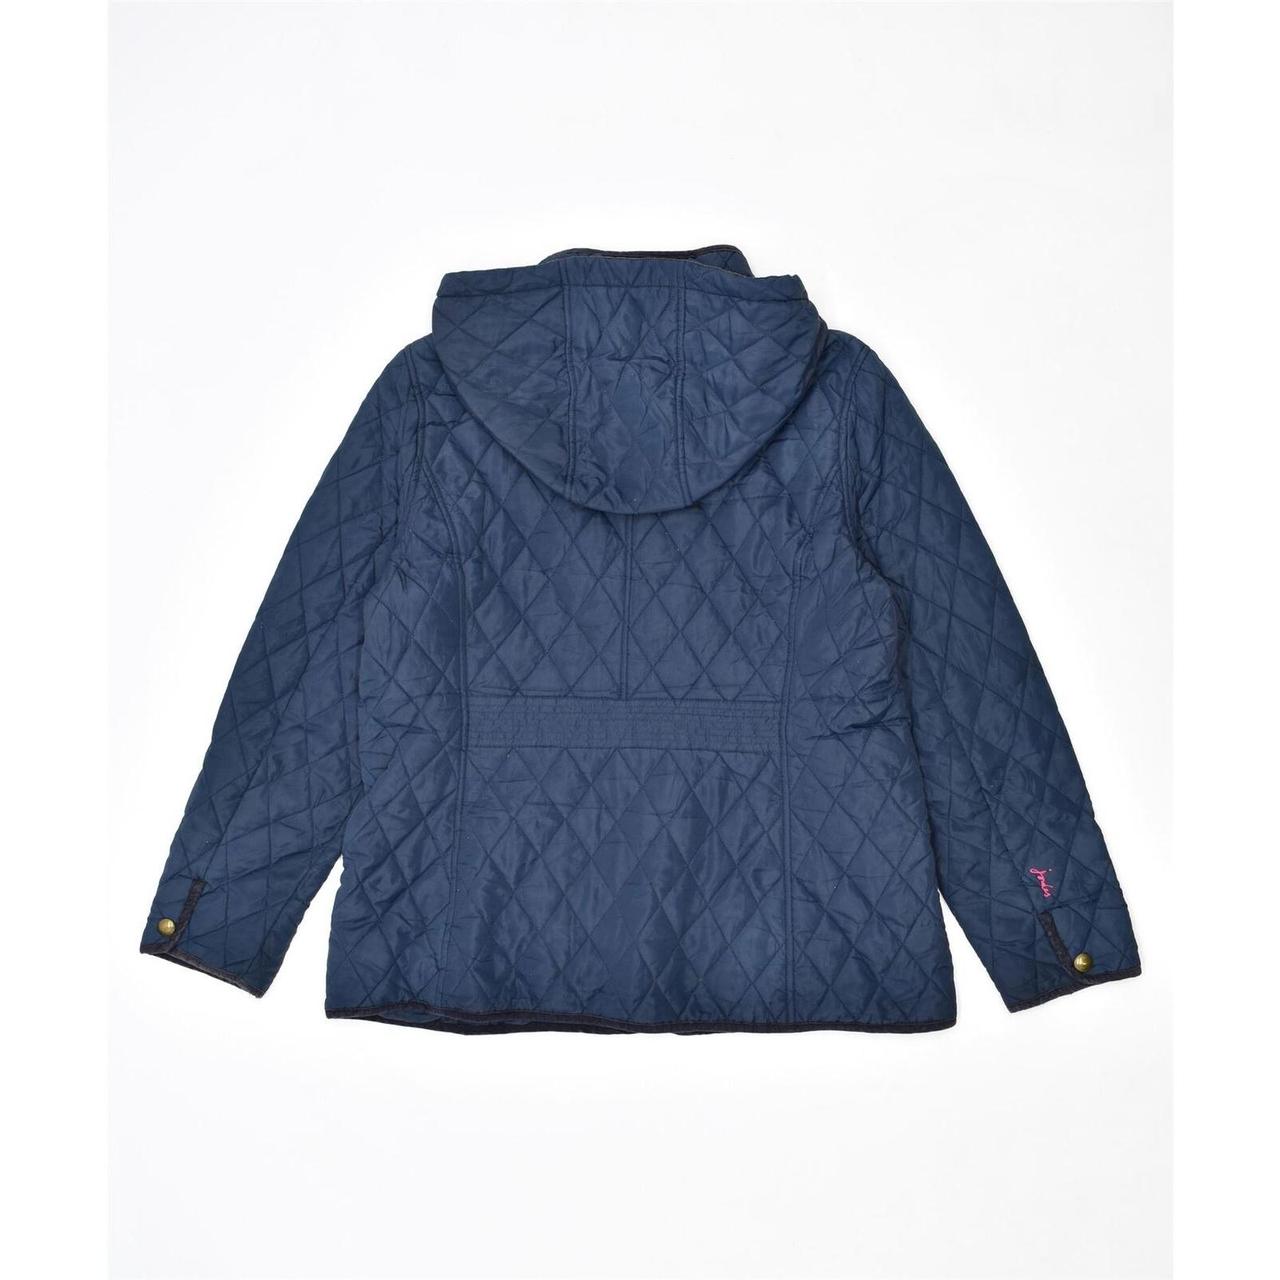 Joules Women's Navy and Blue (2)